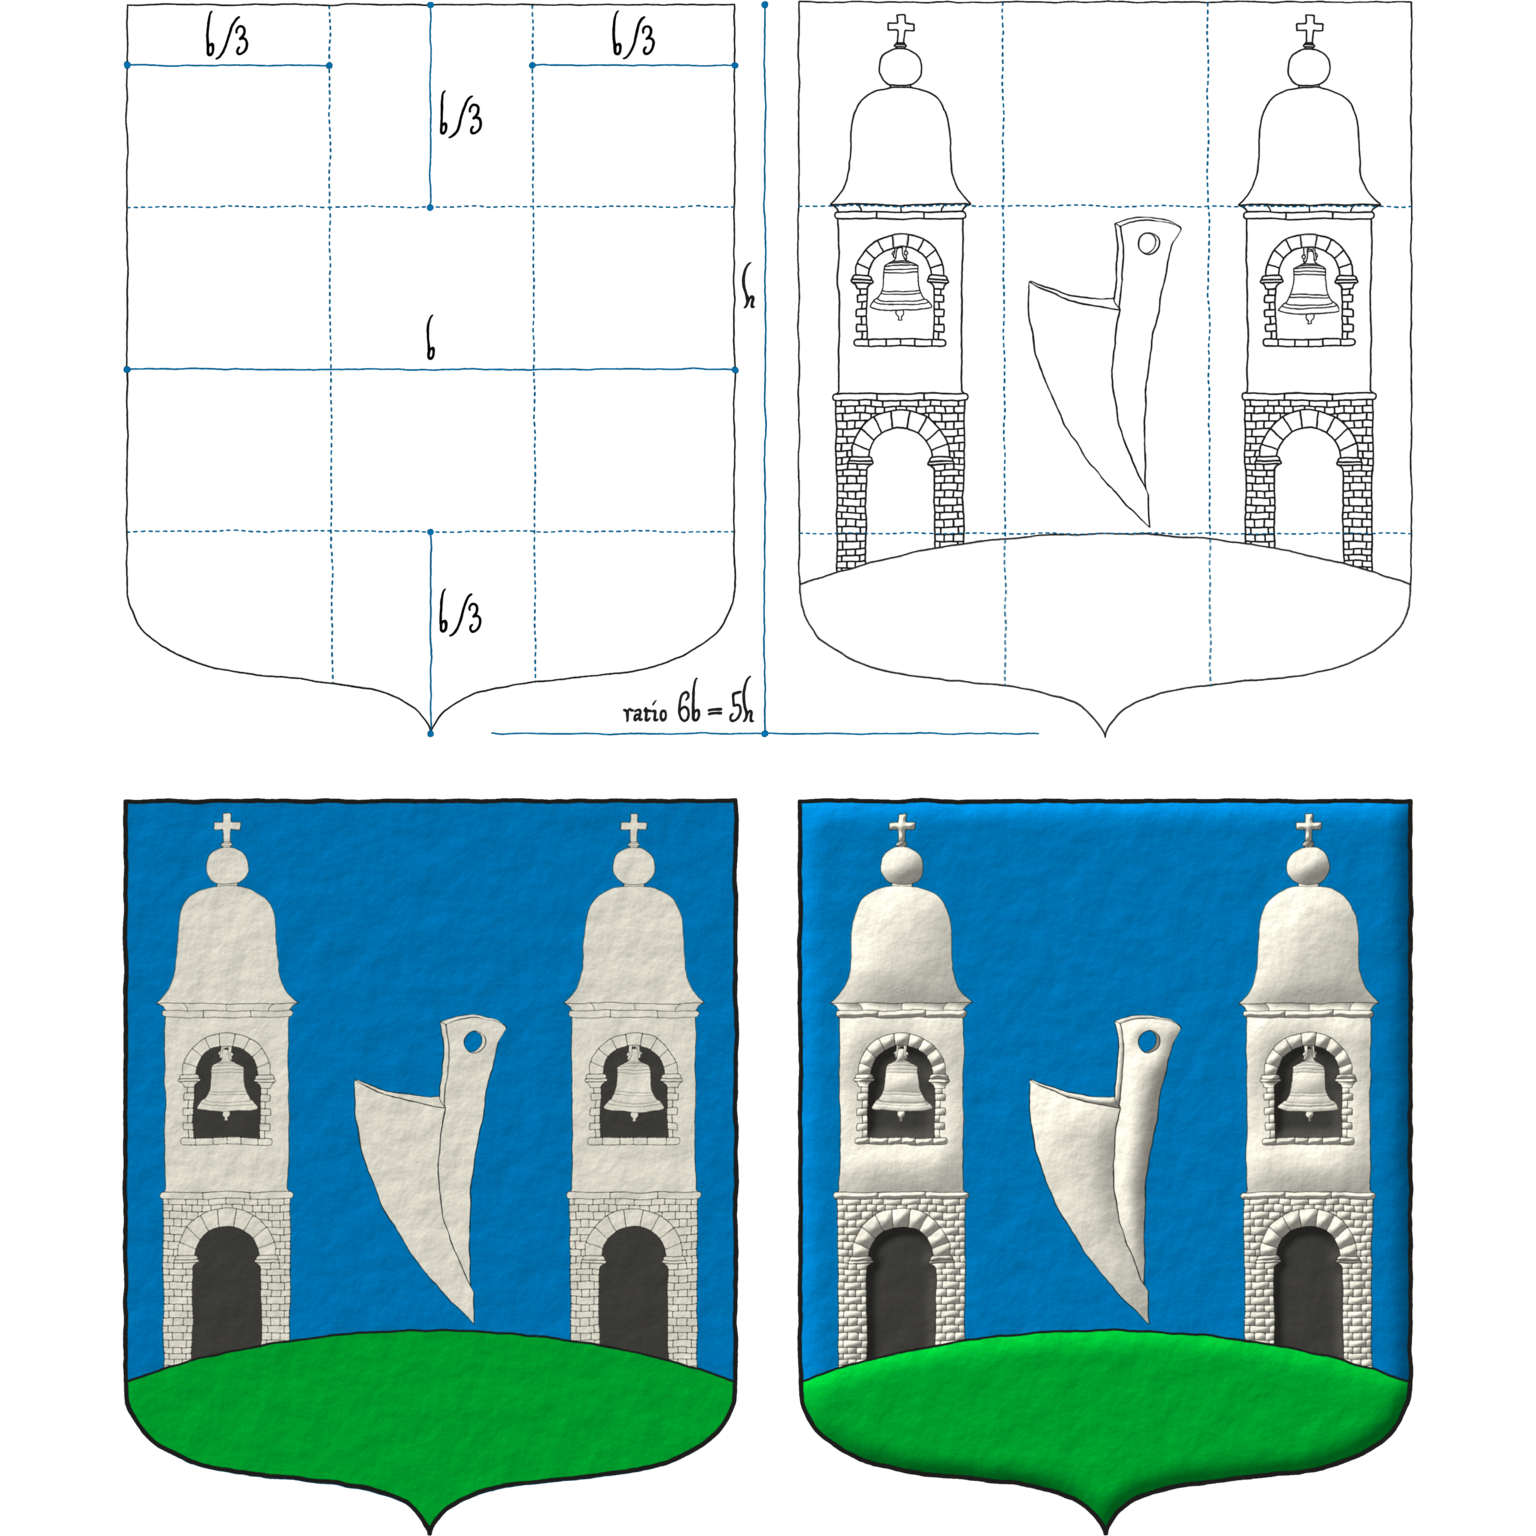 Csernely is a village in Borsod-Abaúj-Zemplén county, Hungary. The following schema shows how I emblazon its coat of arms following the rule of 1/3 of the width of the coat of arms. The official description, not the blazon, is: «...in the blue field of a shield standing on its snout two silver-coloured church towers with onion-shaped cupolas and crosses on their peaks are rising on a green hill. Between them a silver ploughshare is floating with its point upside down...». Notice the mount color Vert over a field color Azure, not uncommon in this heraldic tradition.